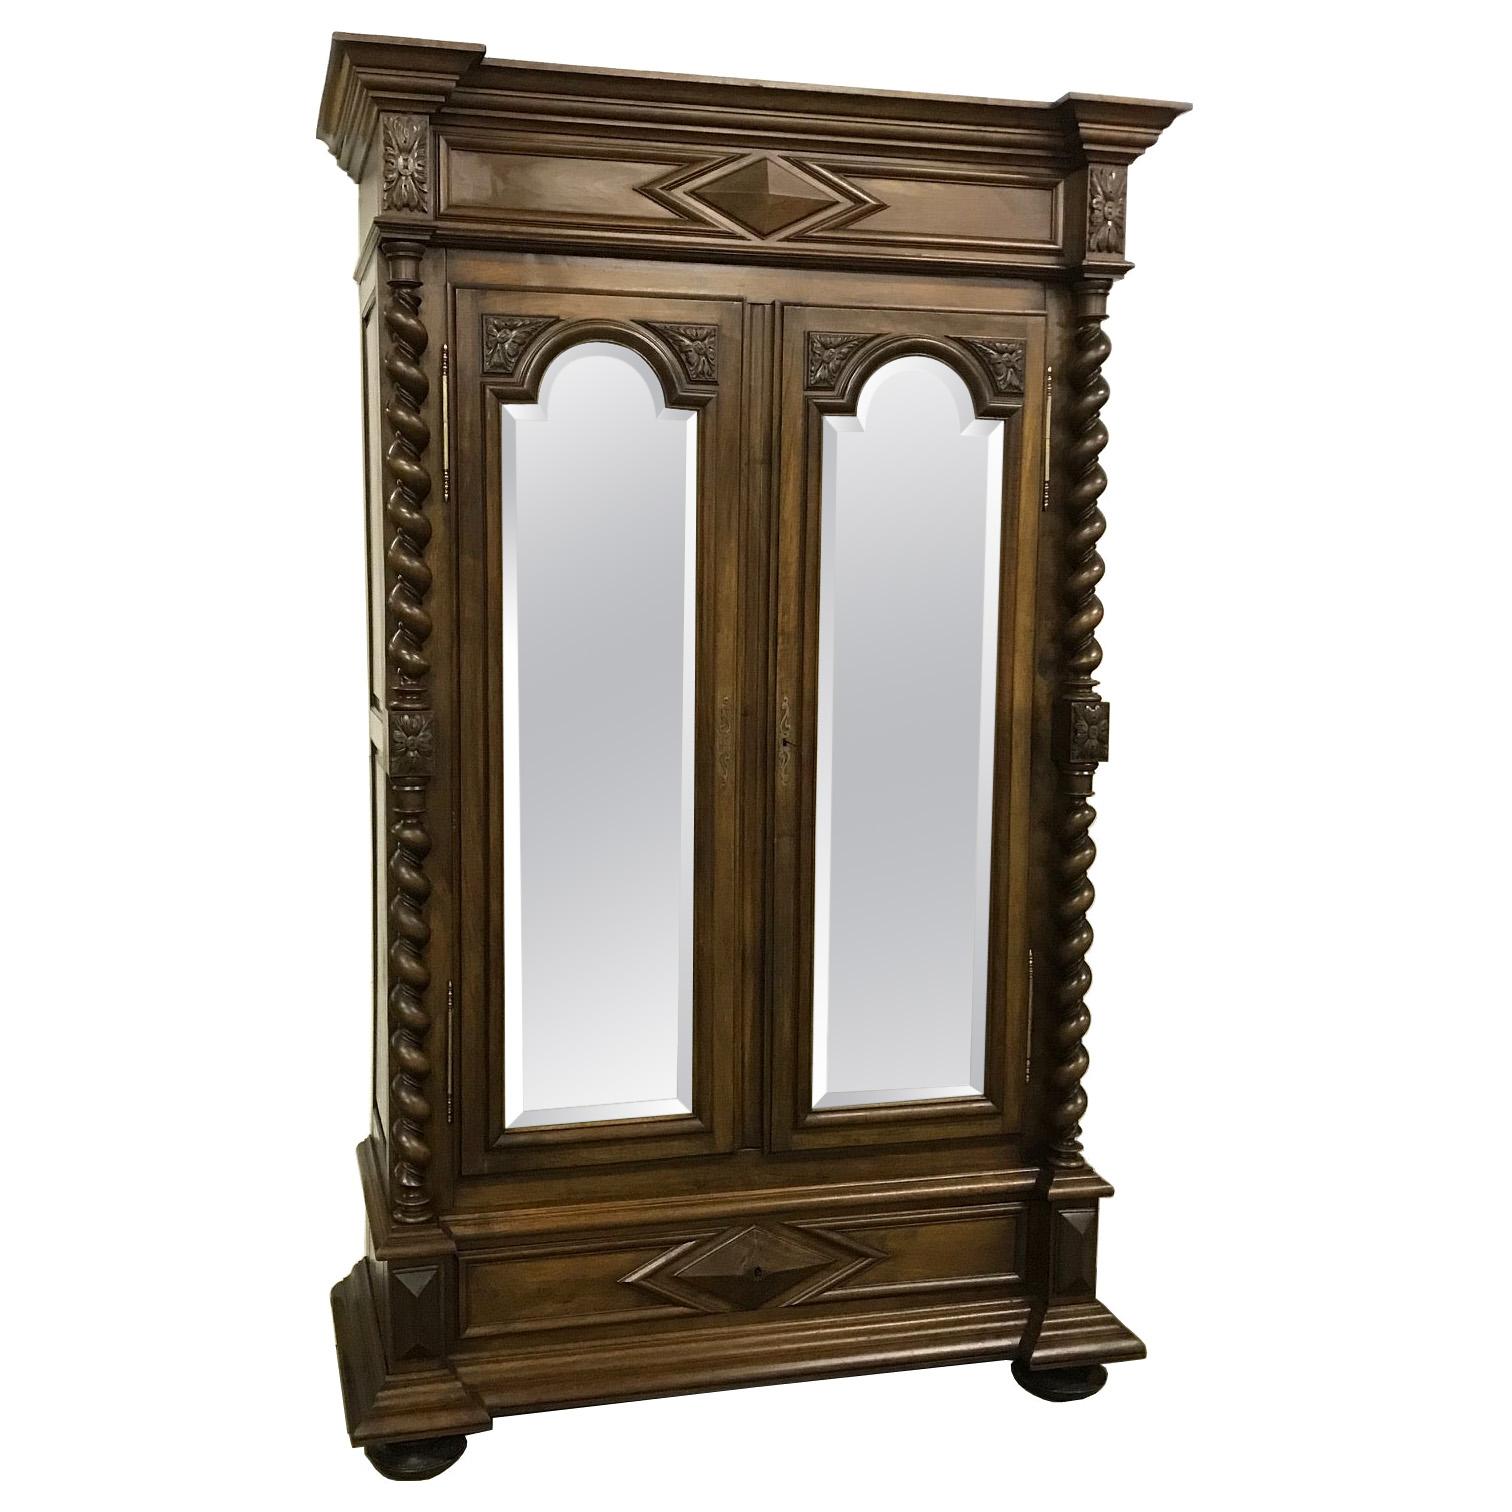 Huge Tall Barley Twist French Carved Walnut Armoire Wardrobe with Mirrored Doors